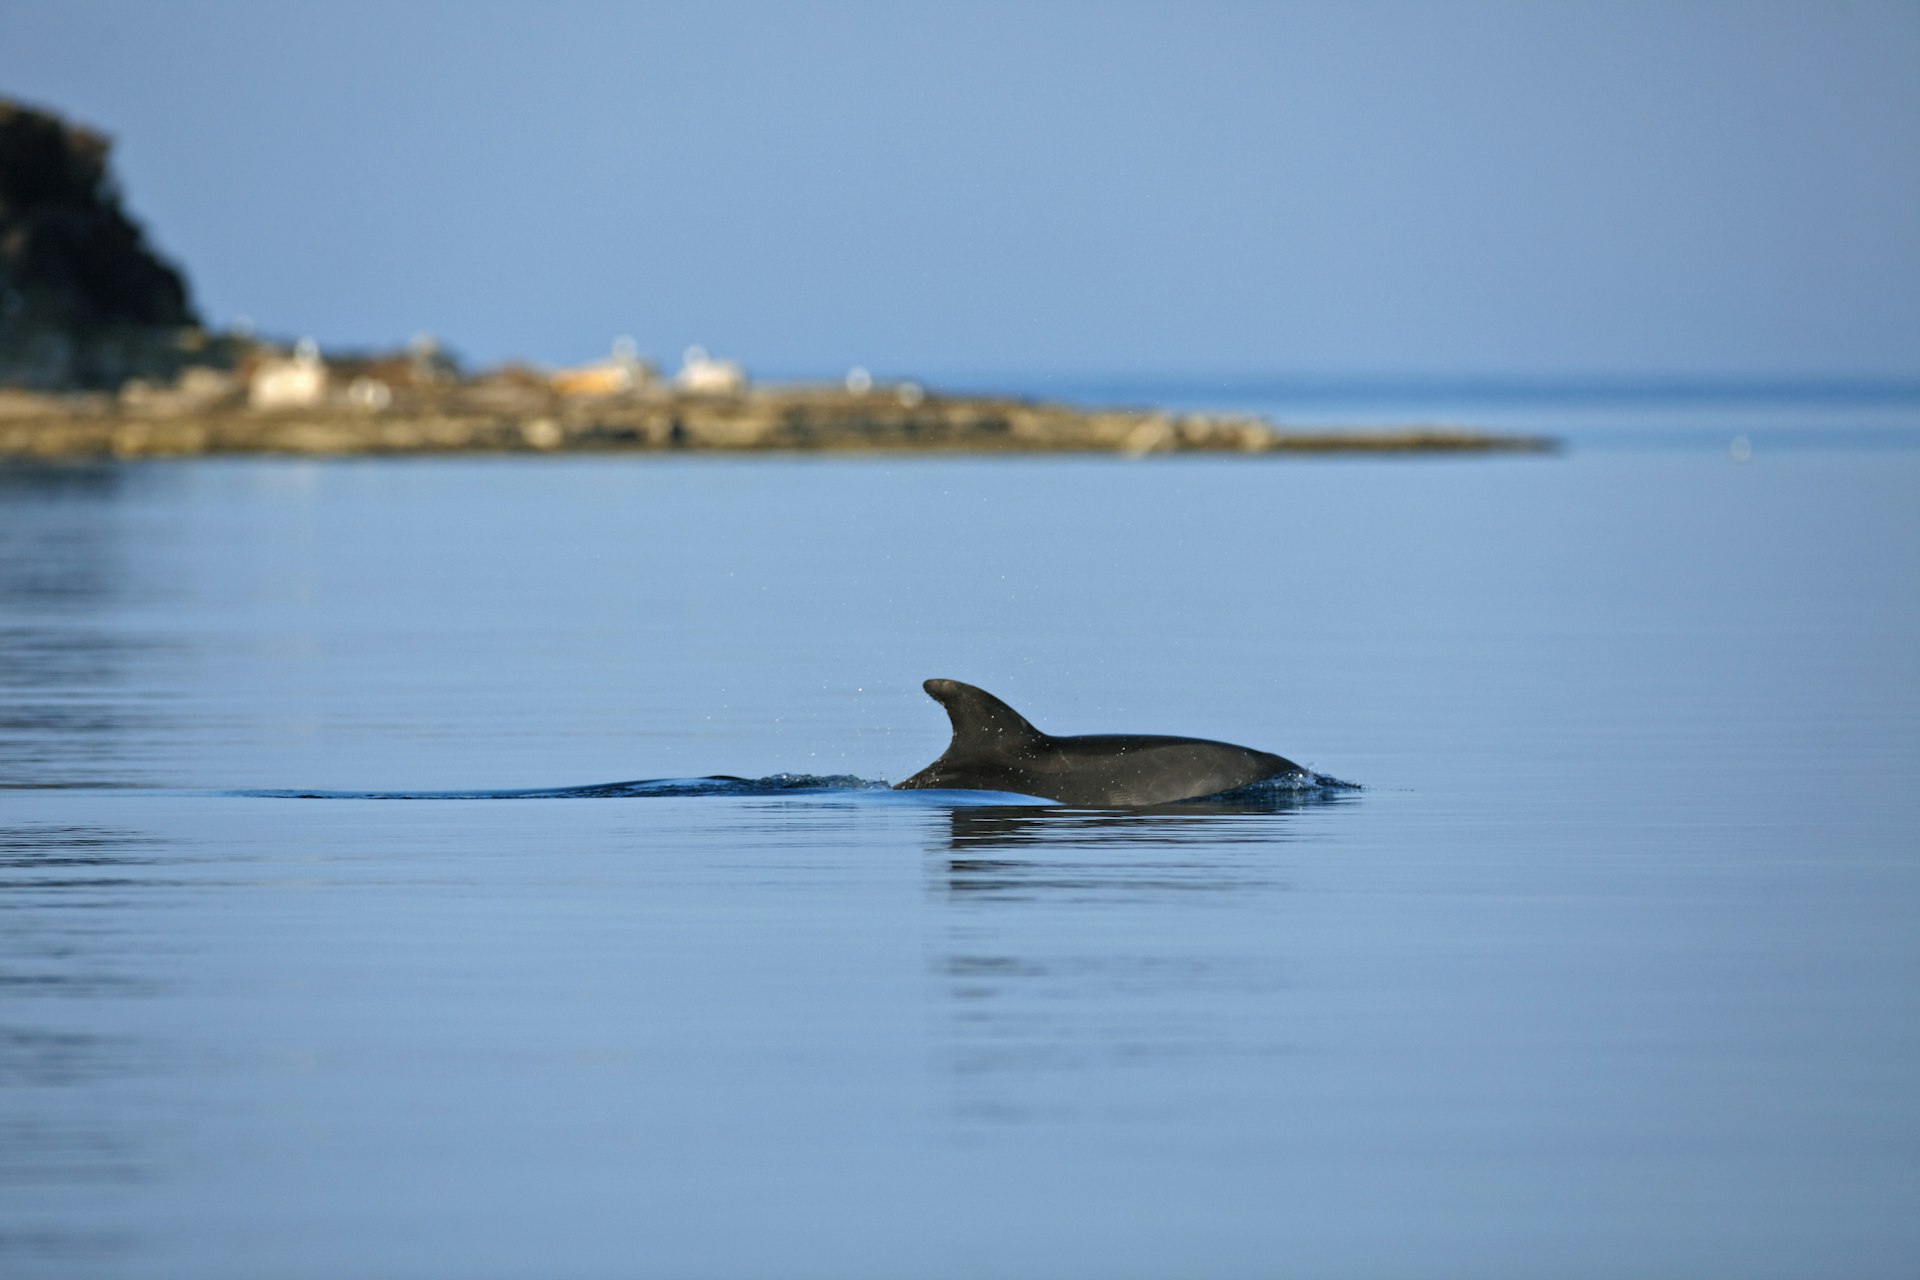 A grey bottlenose dolphin surfacing in still waters with land in the background